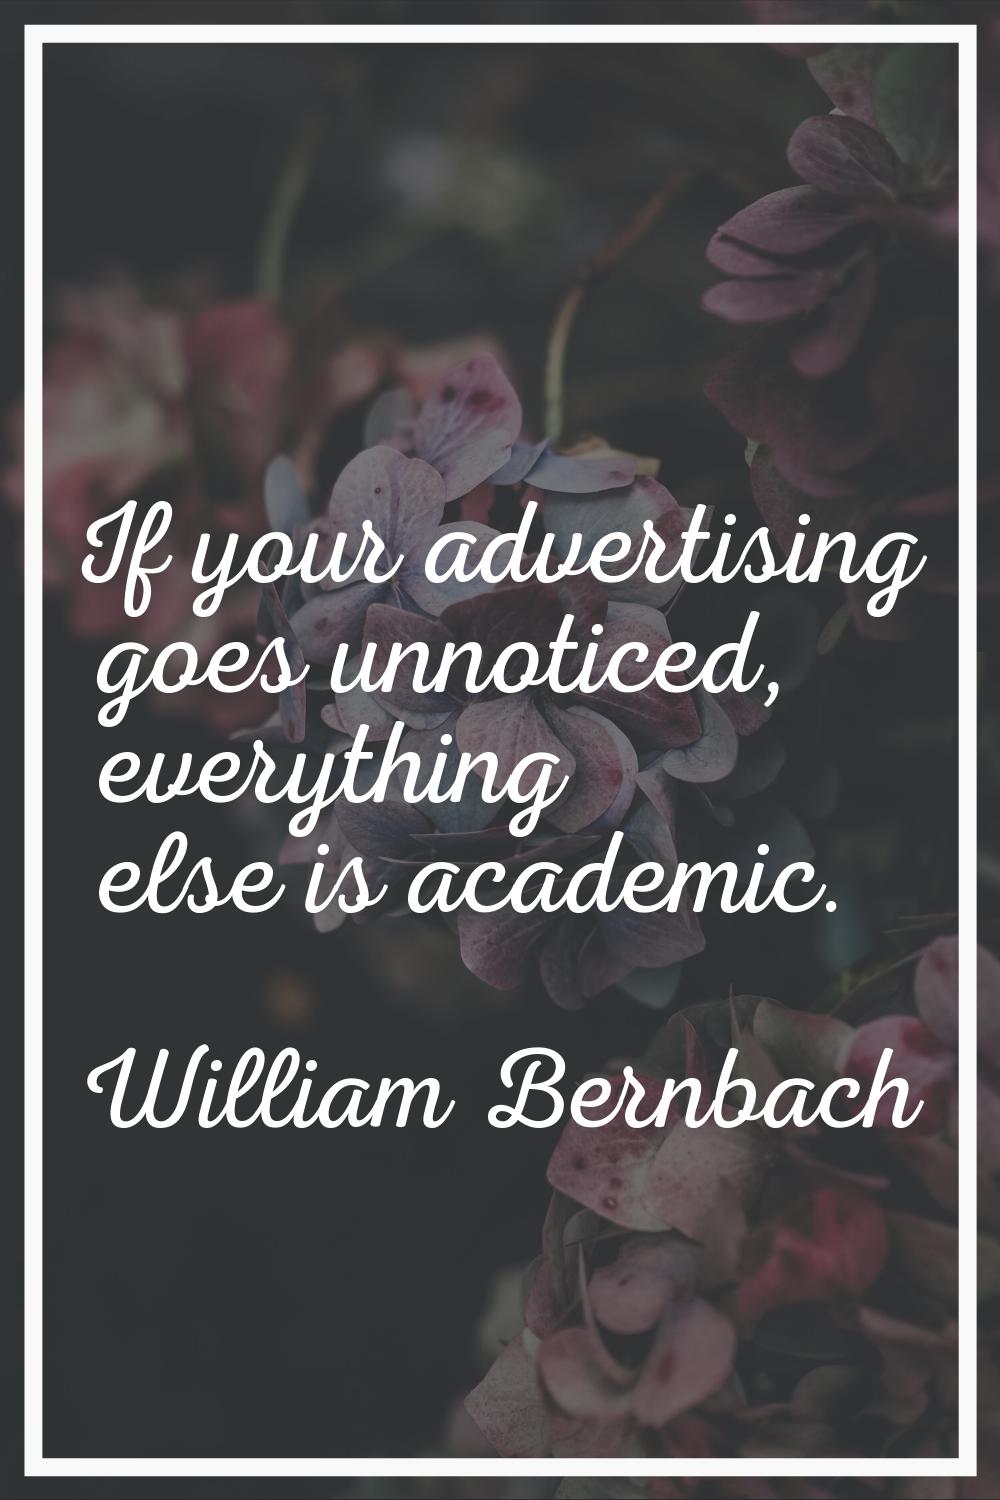 If your advertising goes unnoticed, everything else is academic.